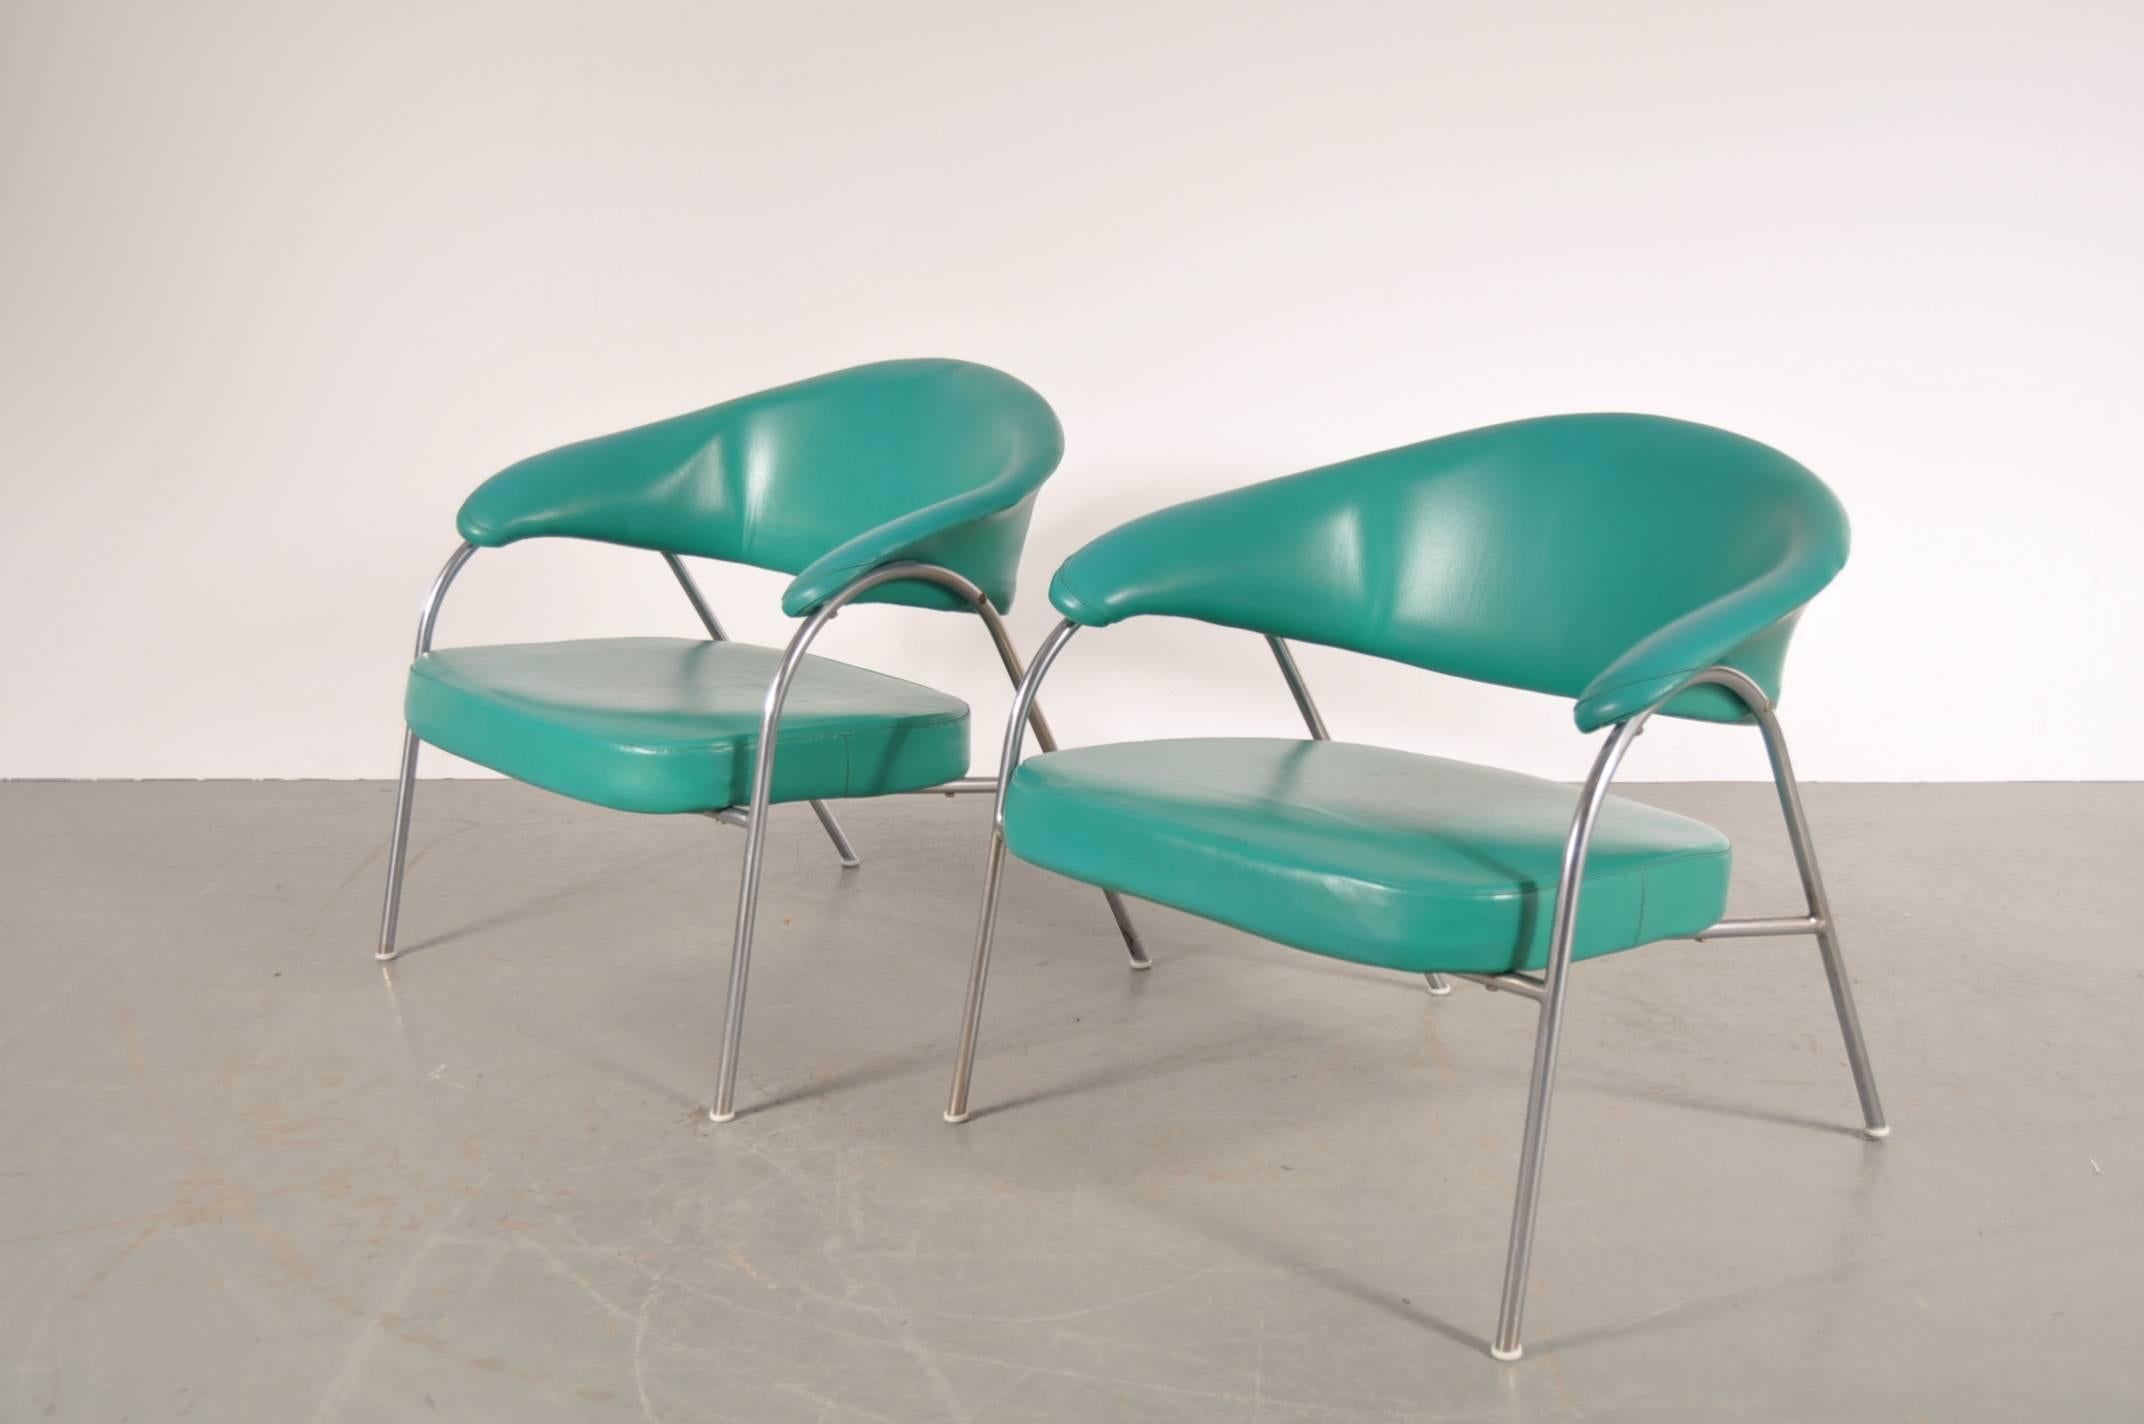 Unique pare of easy chairs produced by Arflex in Italy, circa 1960.

These rare chairs are upholstered in a very appealing turquoise skai upholstery. Together with the chrome metal base, this gives the chairs a very own style. It fits in the